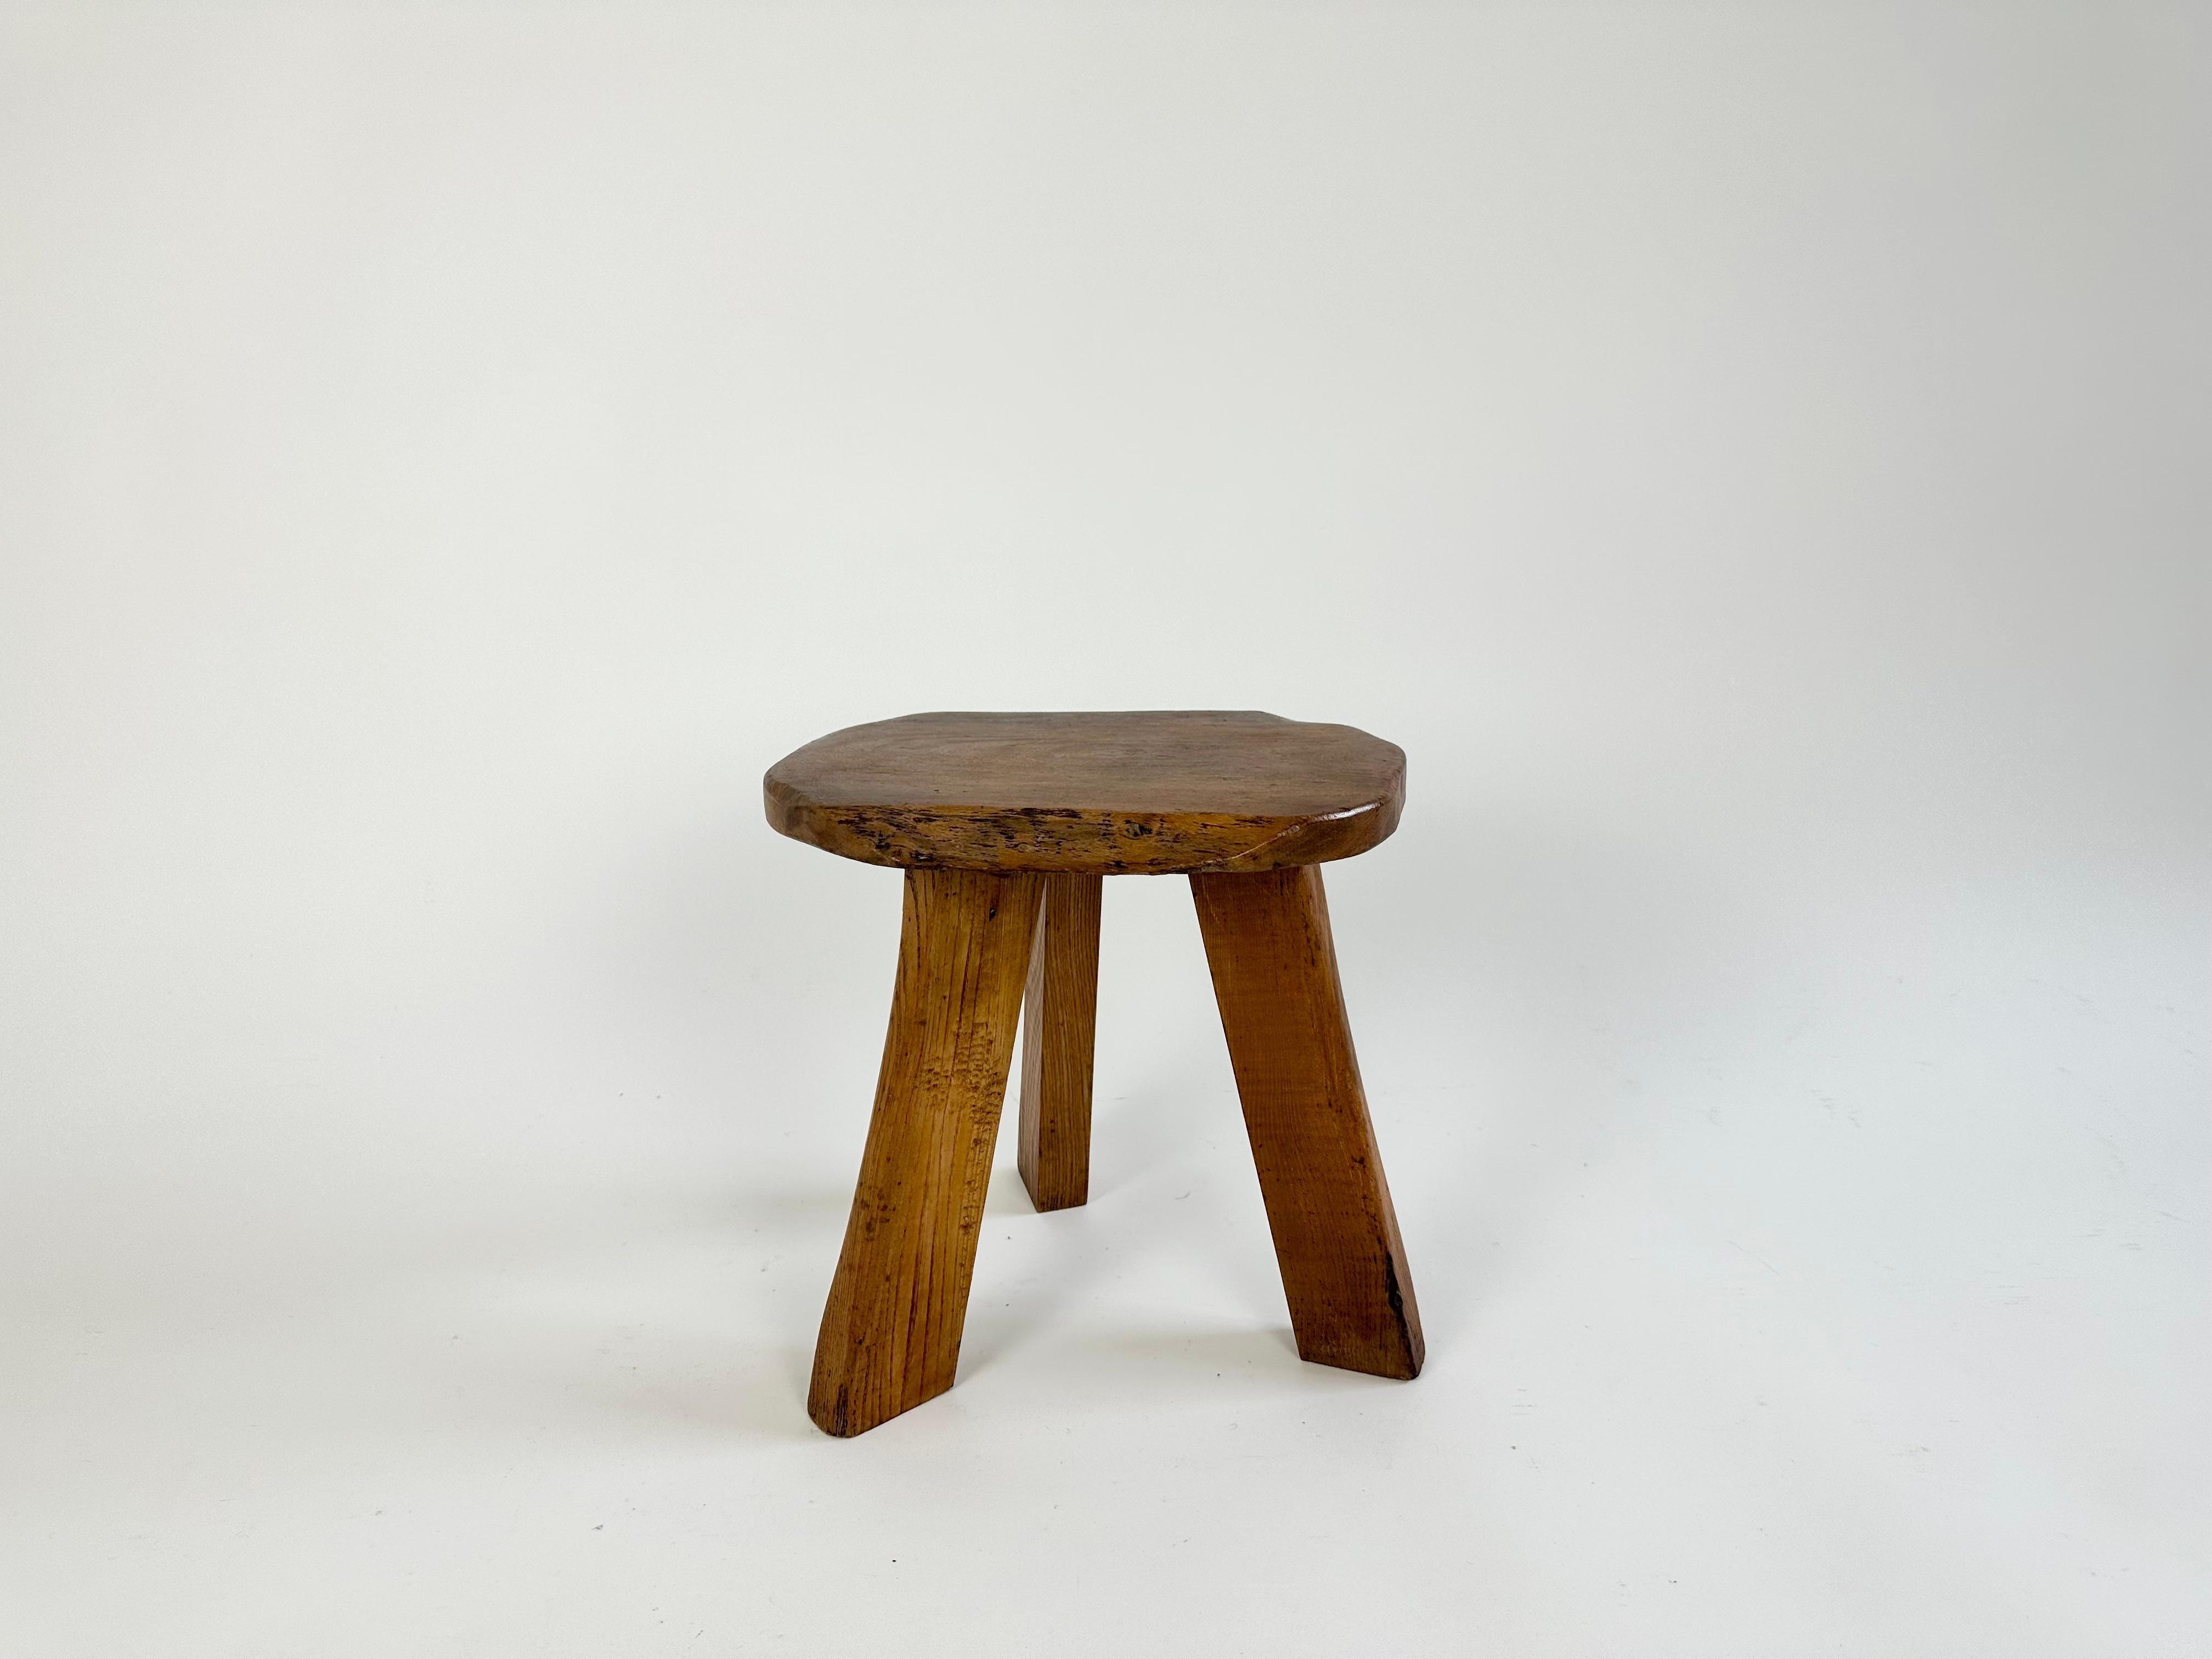 Vintage primitive low stool by Wanderwood, England c.1950-60

Rustic brutalist syle. 

Great patina with signs of age as pictured, no damage or old repairs. Cleaned, ready for use.

Ideal for use as a low side table

Worldwide shipping

